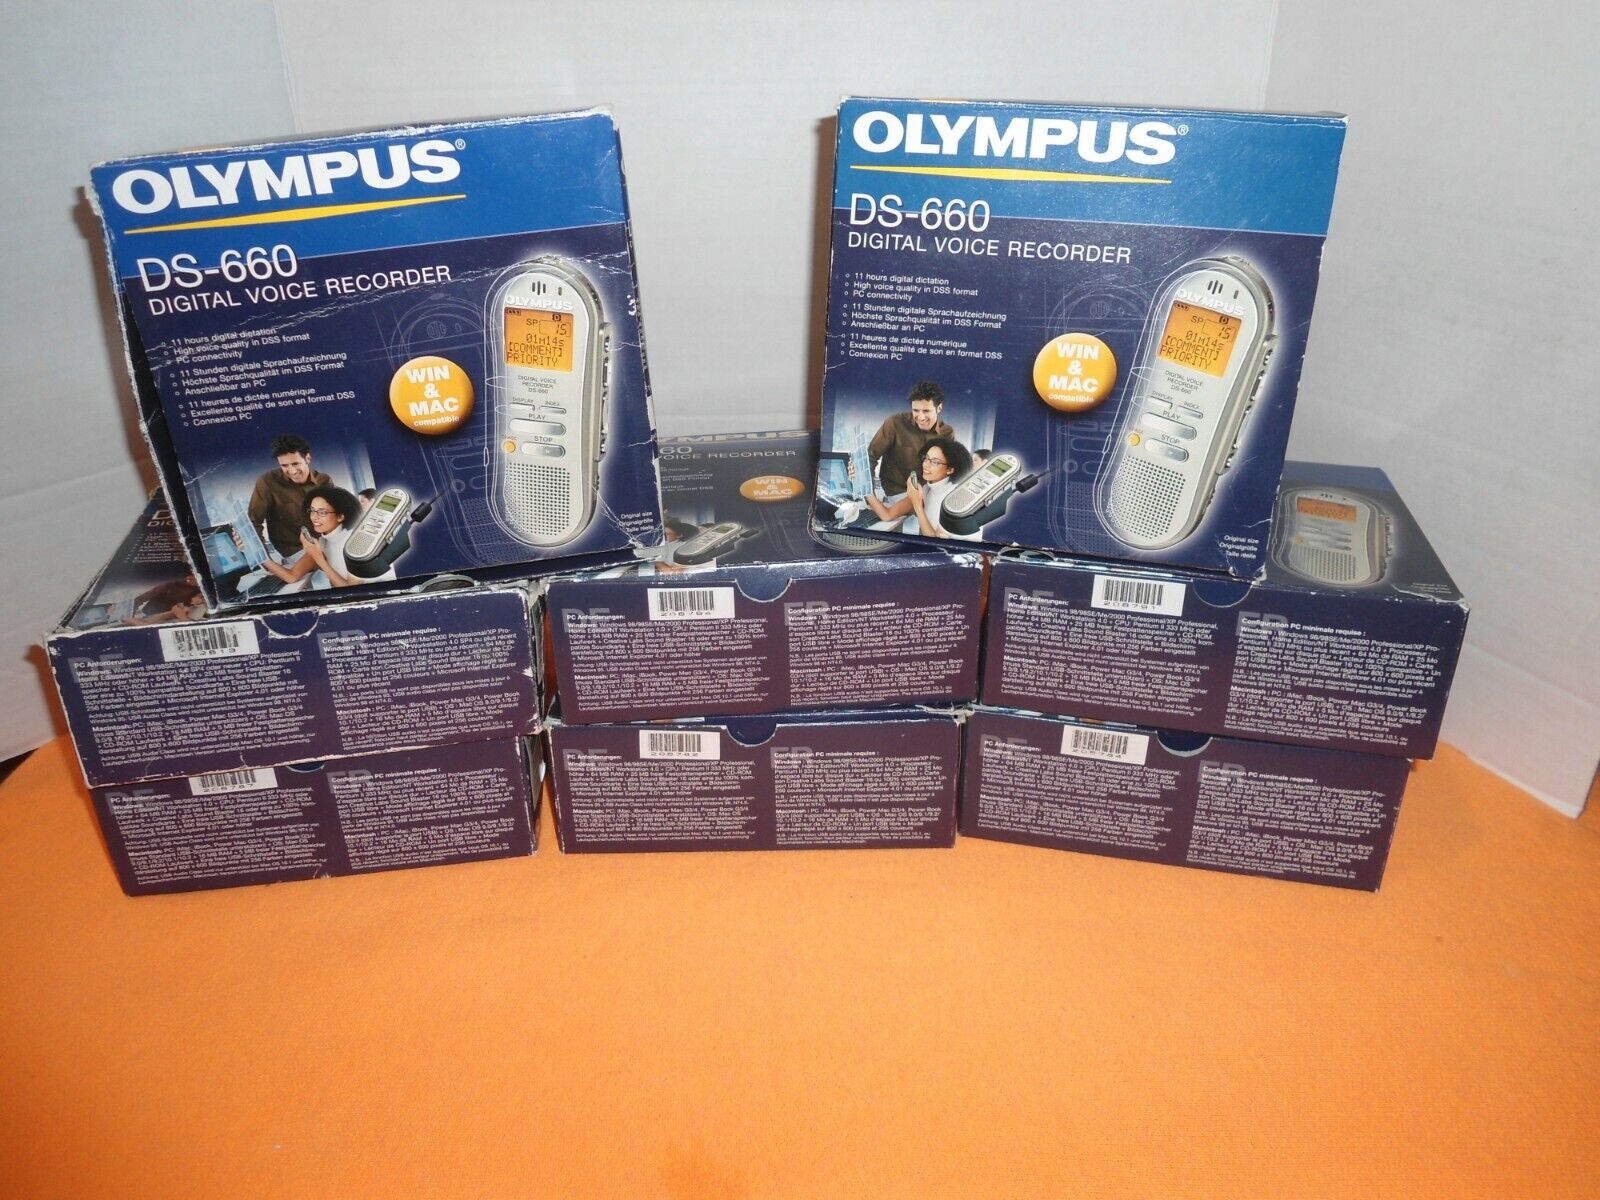 Olympus DS-660 (32 MB,11 Hours) Handheld Digital Voice Recorder,(8 in one lot)! OLYMPUS DS-660, OLY660, 141690